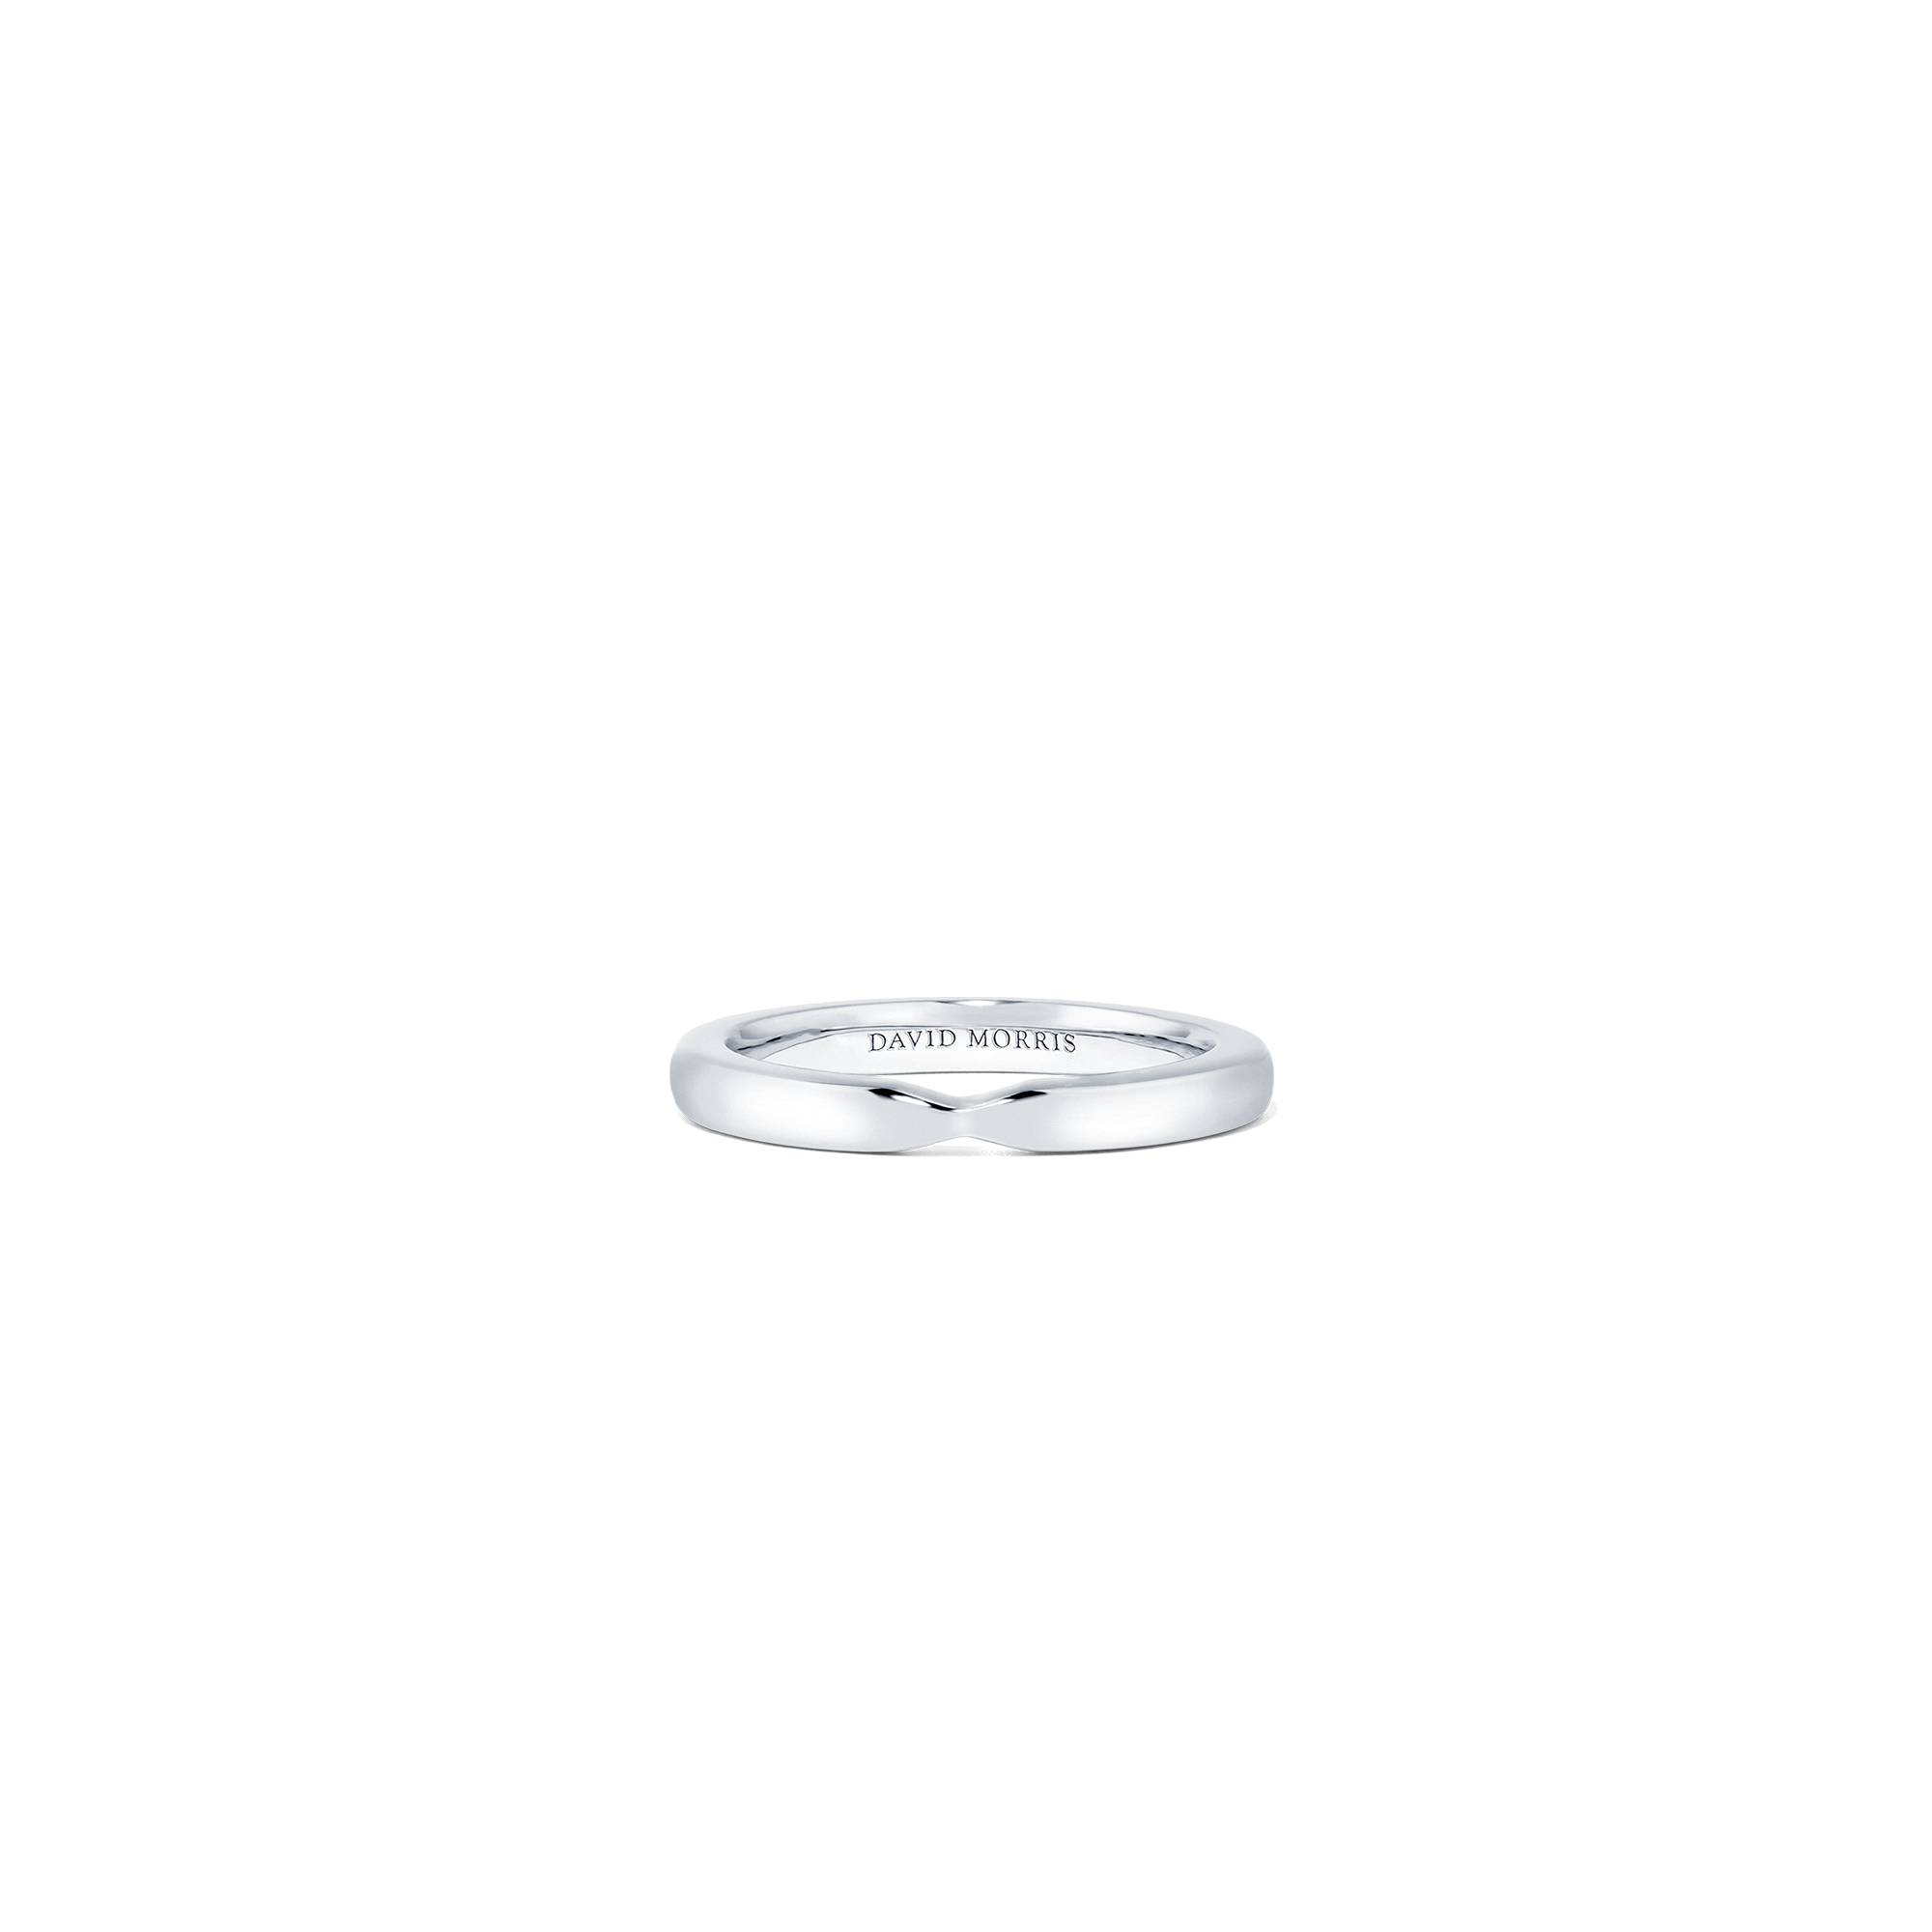 Pinched wedding band 1 22 from david morris